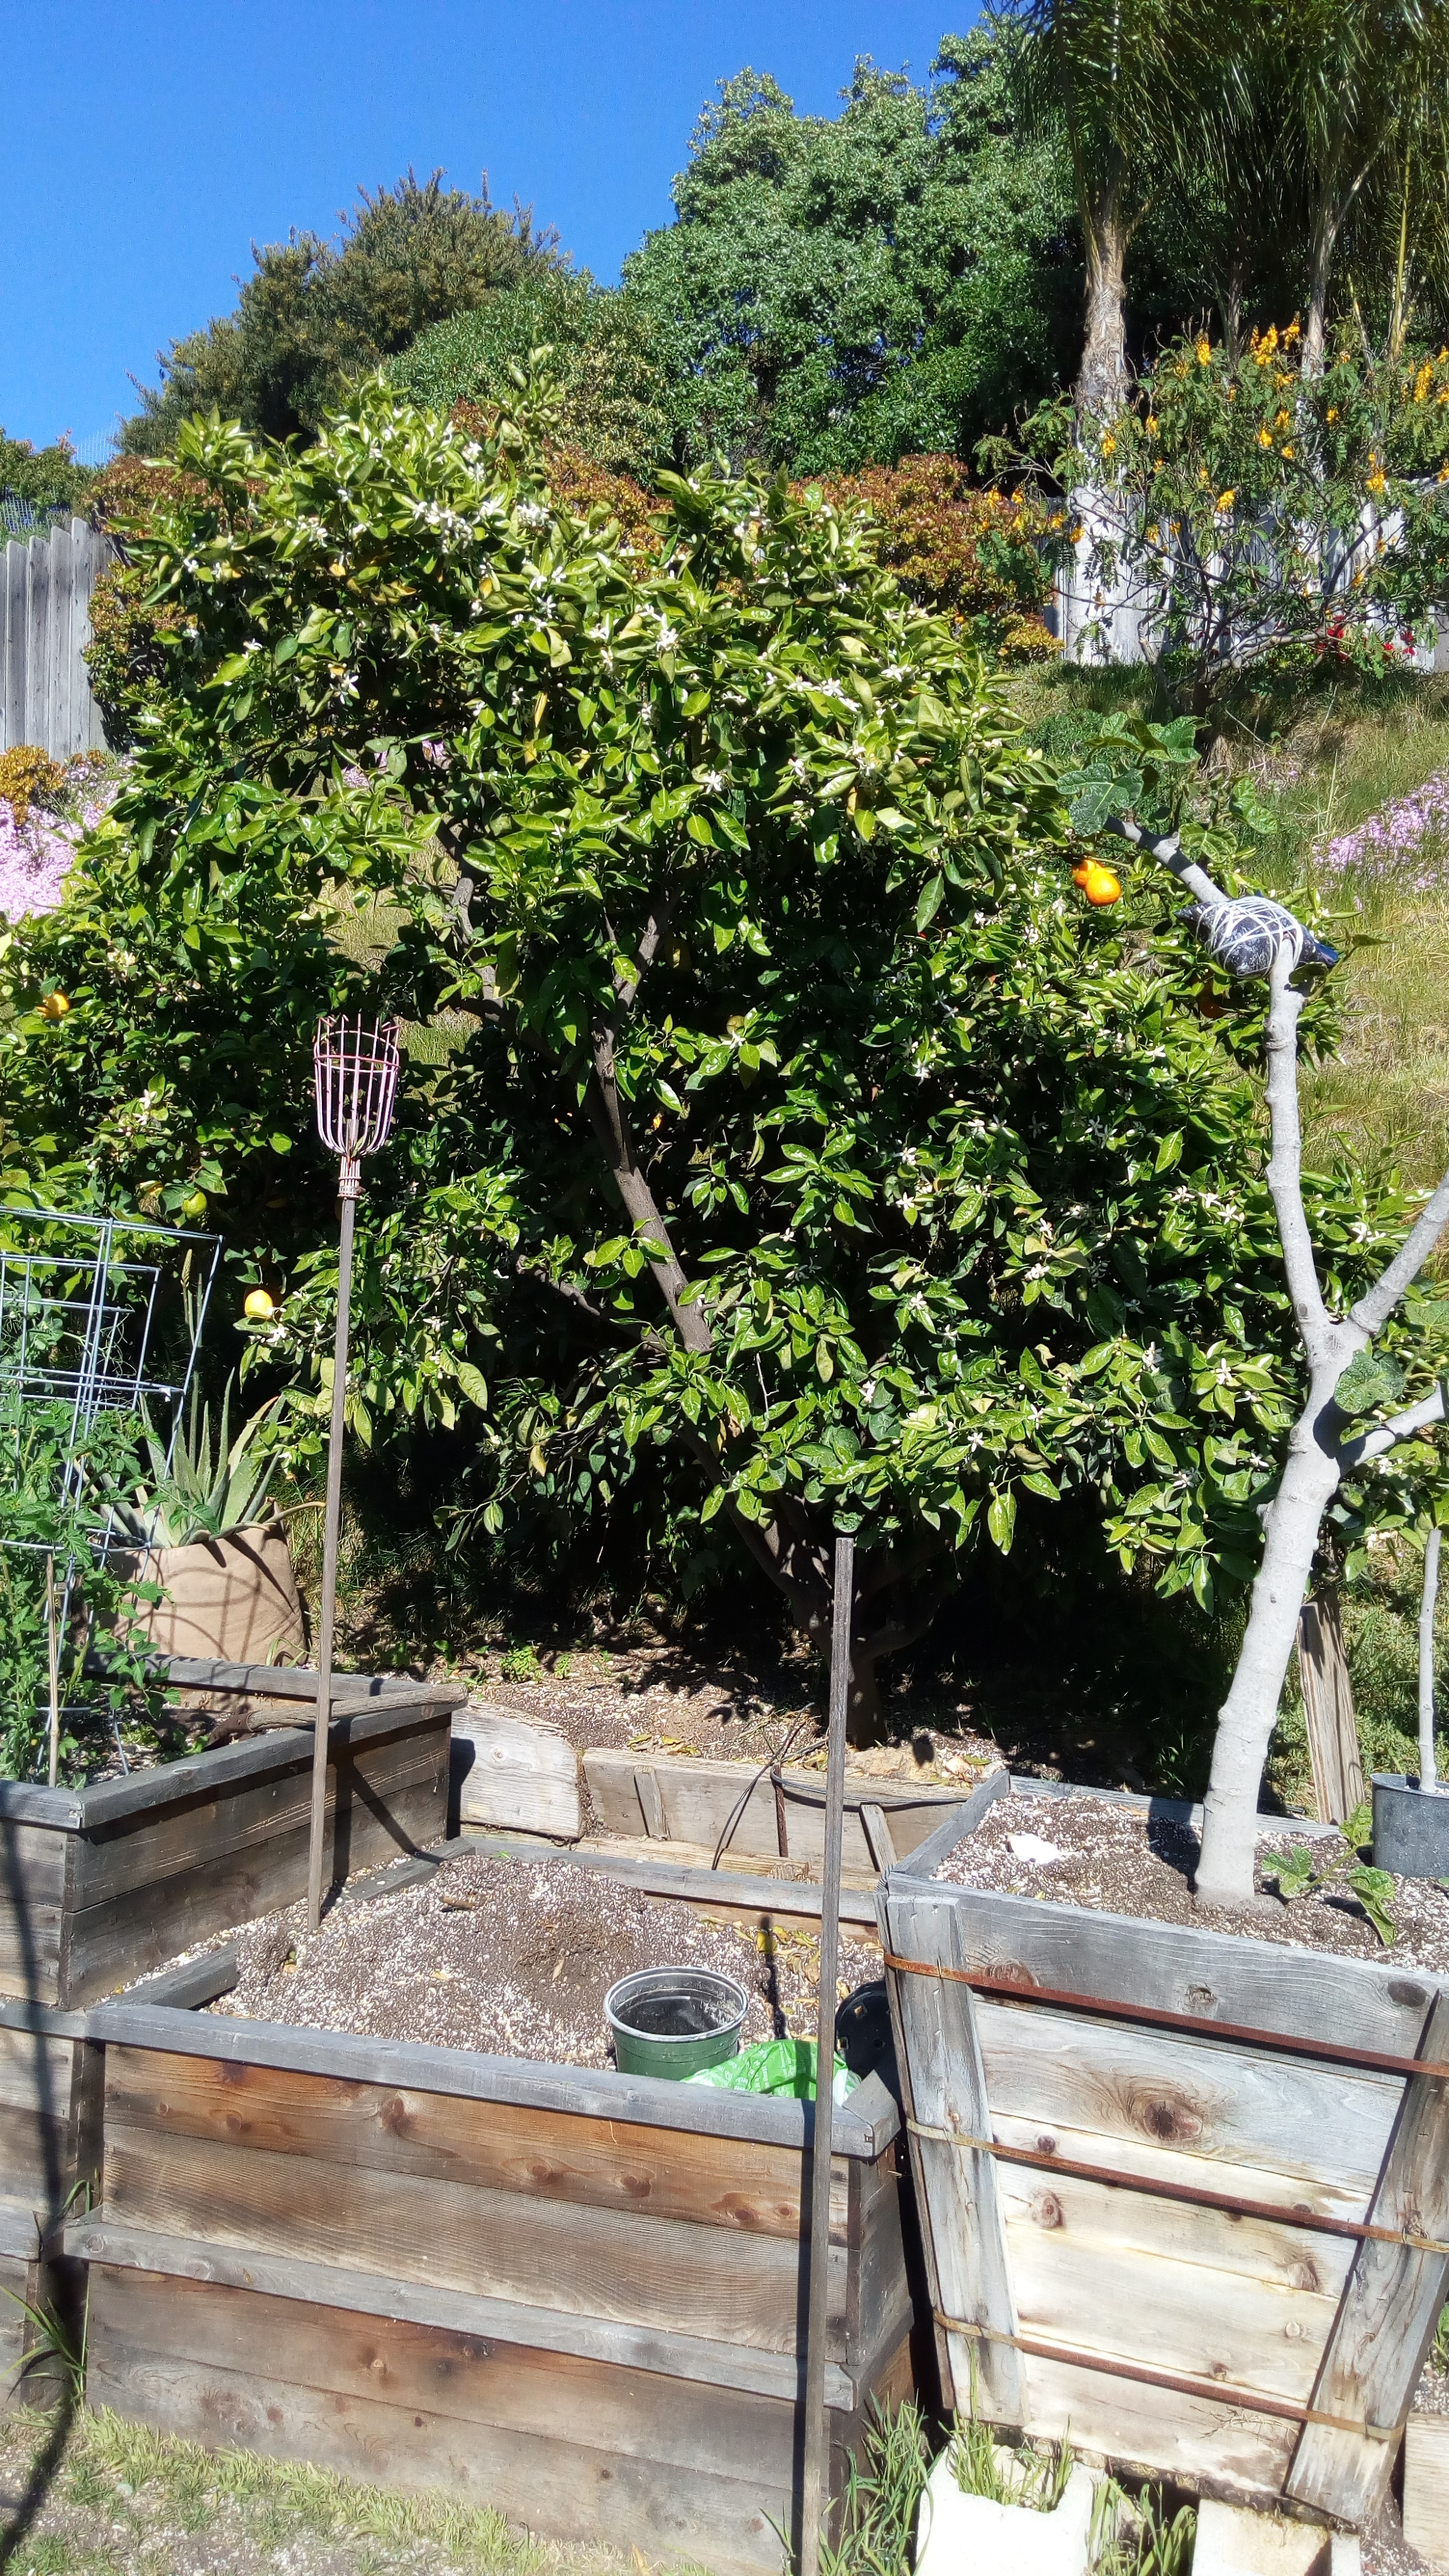 (1/4) “Orange tree.  Look how healthy the leaves are. Extremely shiny, no bugs, lots and lots of flowers. Thanks Eden!” -Mike Jones